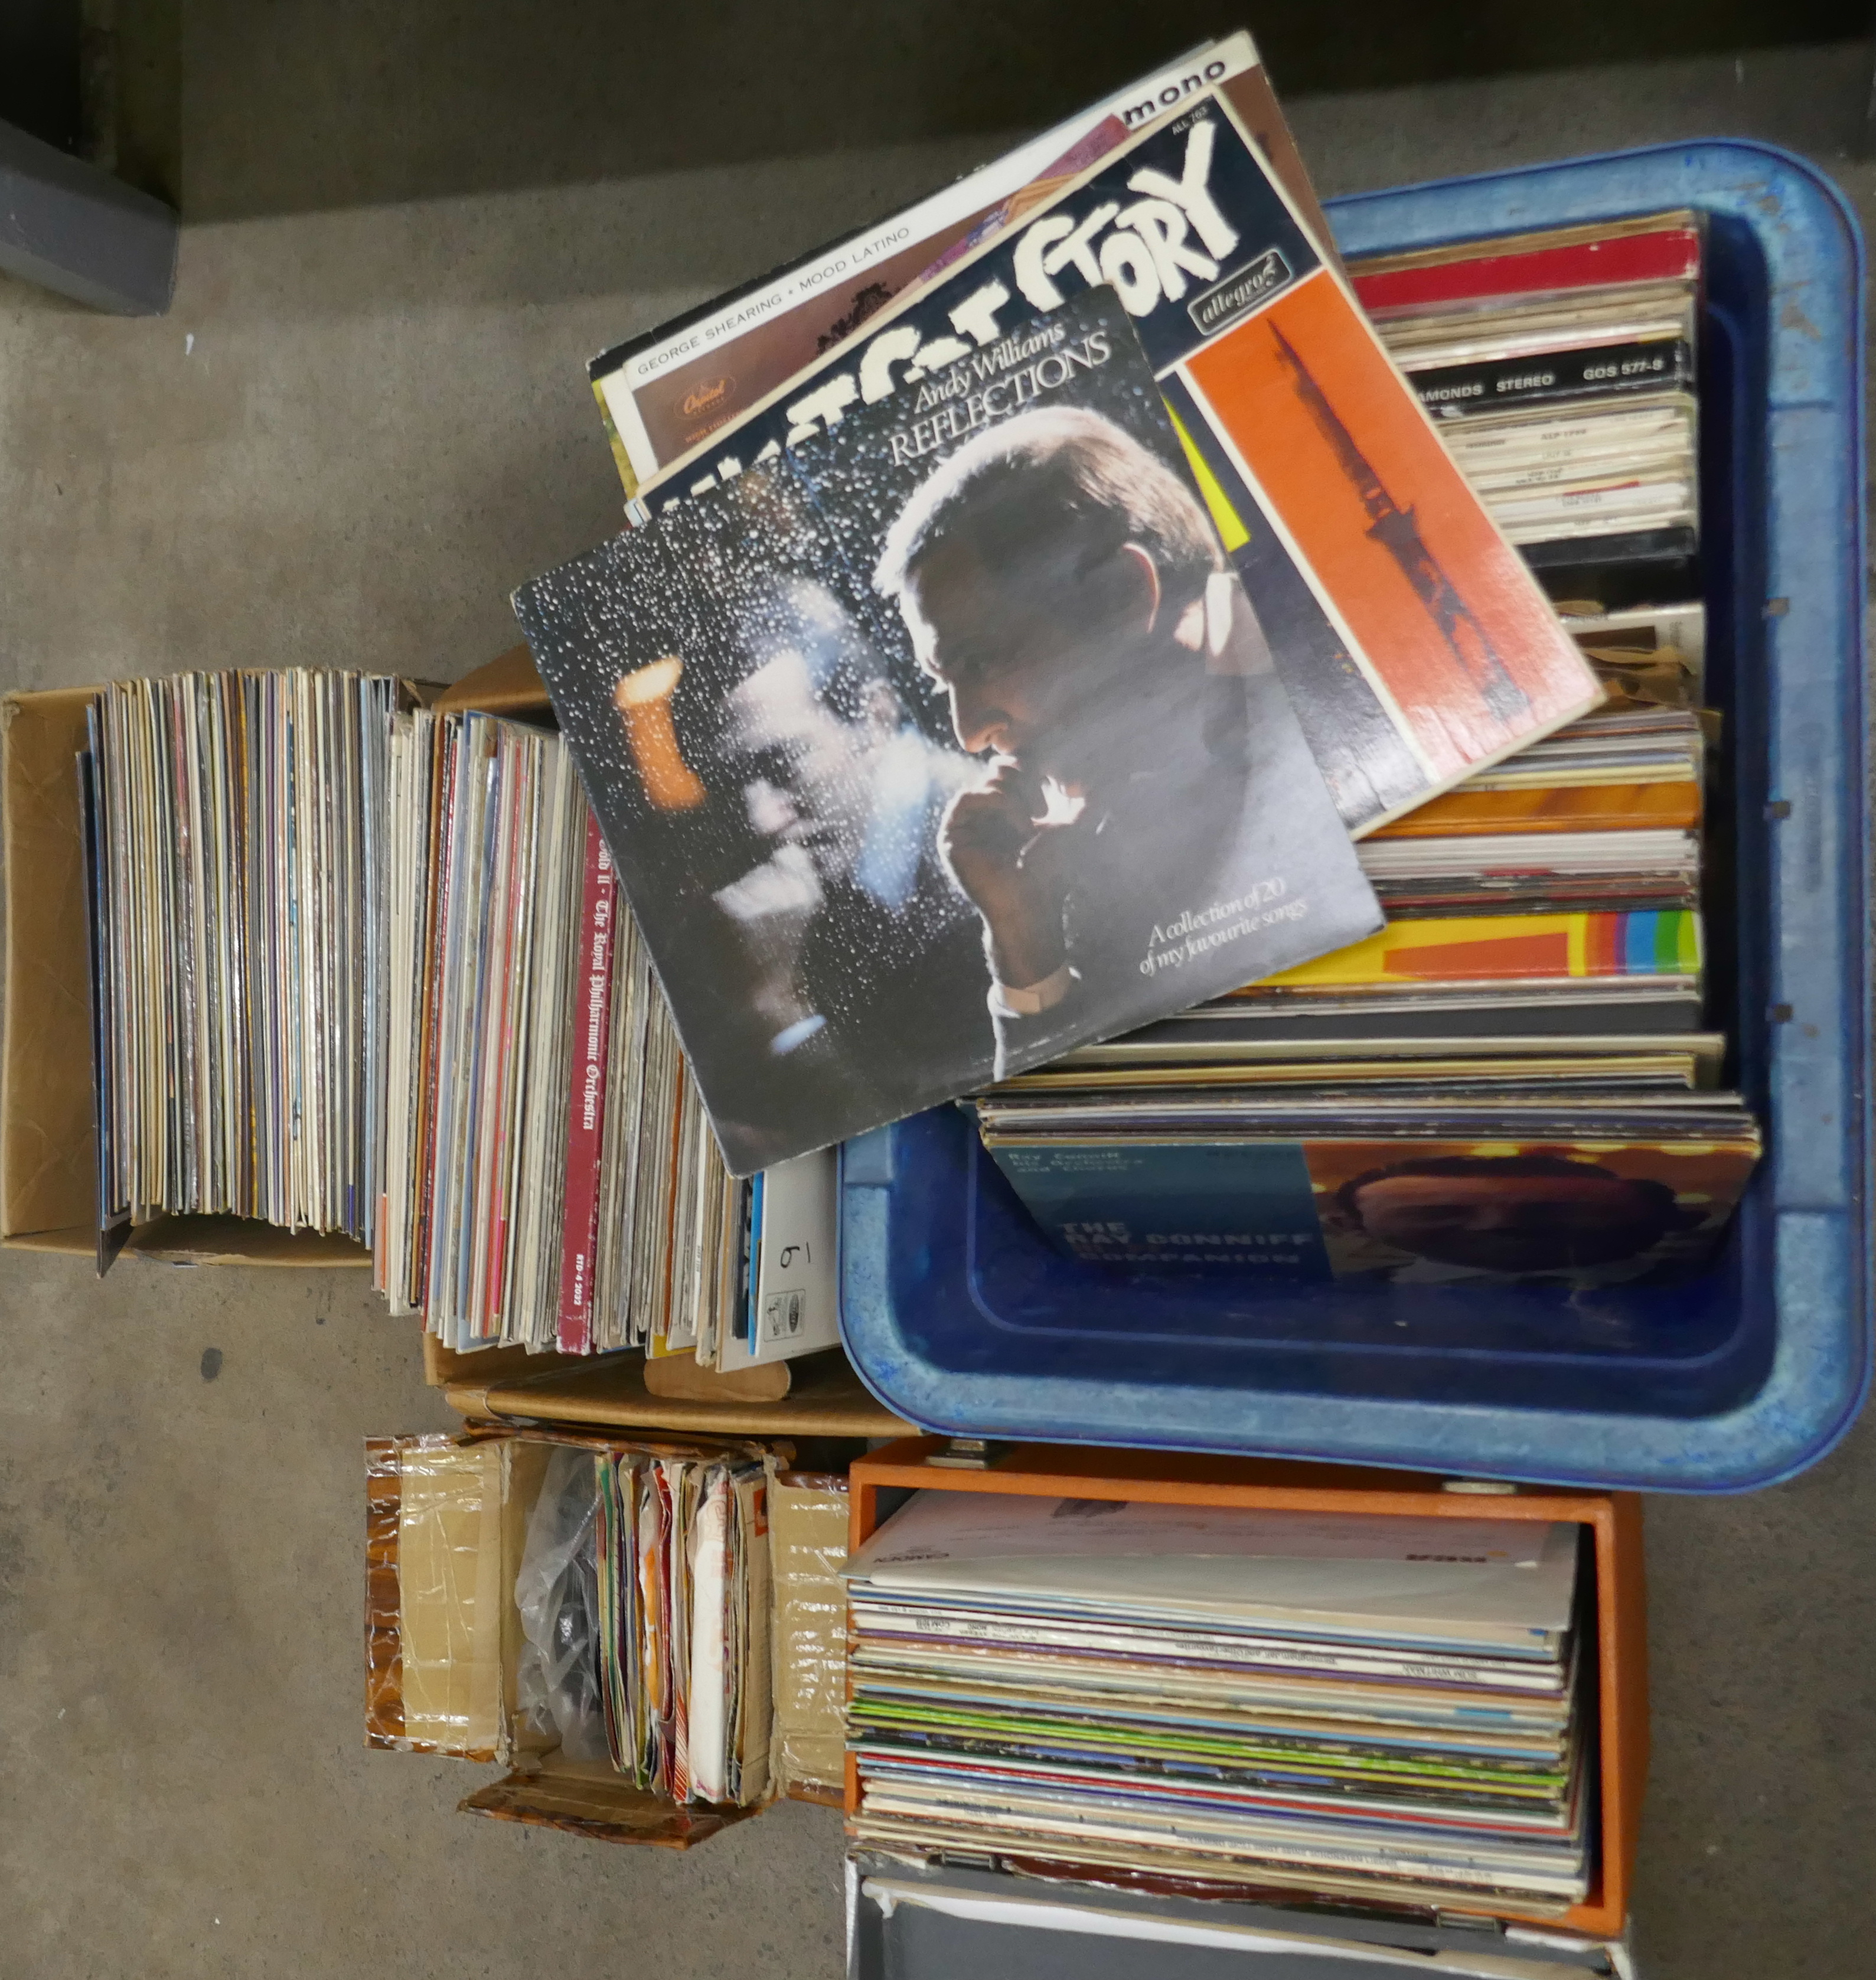 A large collection of LPs and 45 rpm vinyl records, some classical, mainly 1950s and 1970s